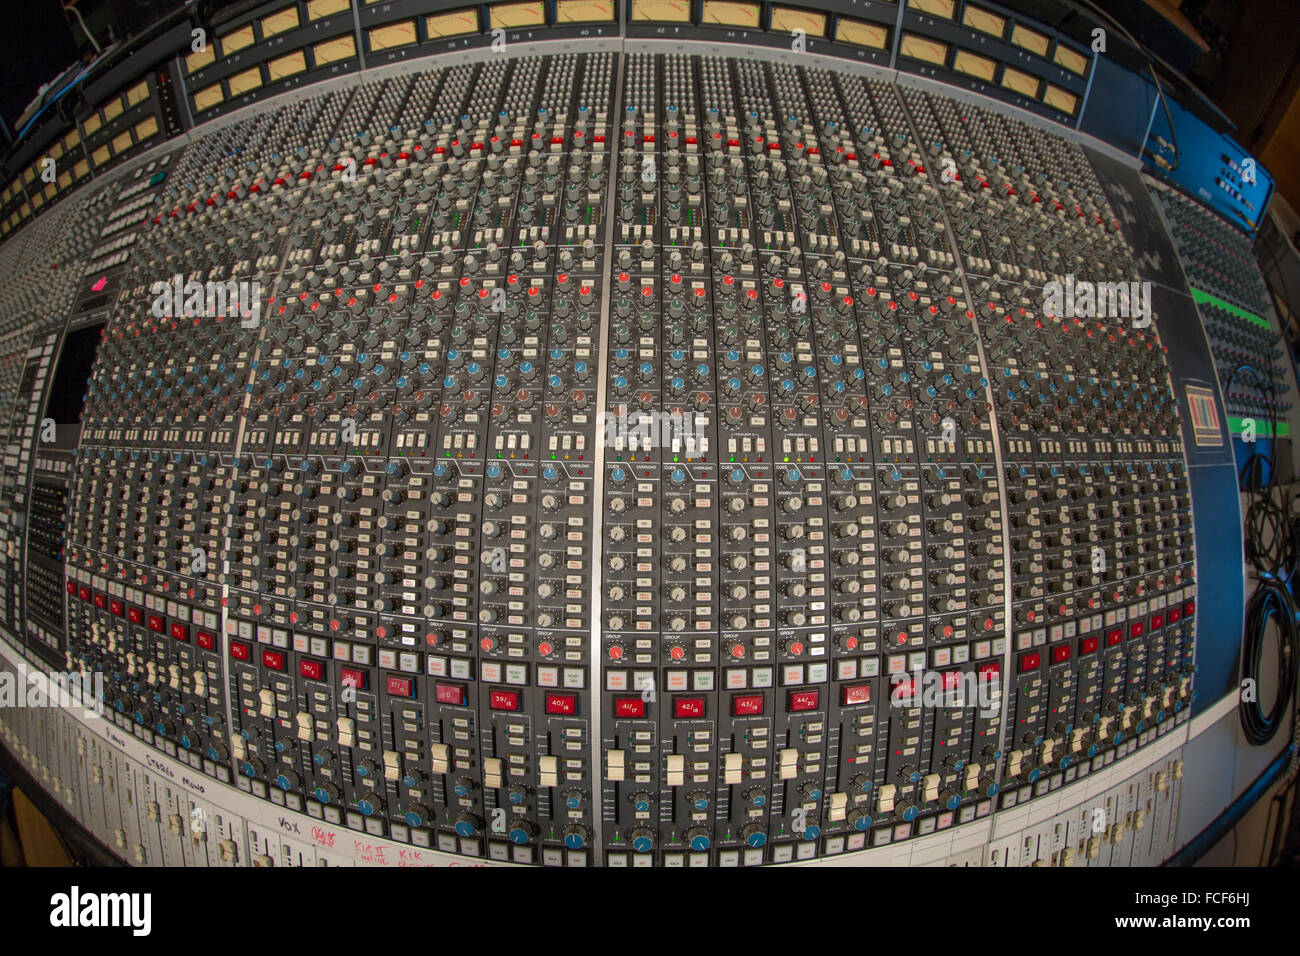 above fish eye view of ssl e series sound mixing desk showing buttons, knobs, controlls and faders Stock Photo